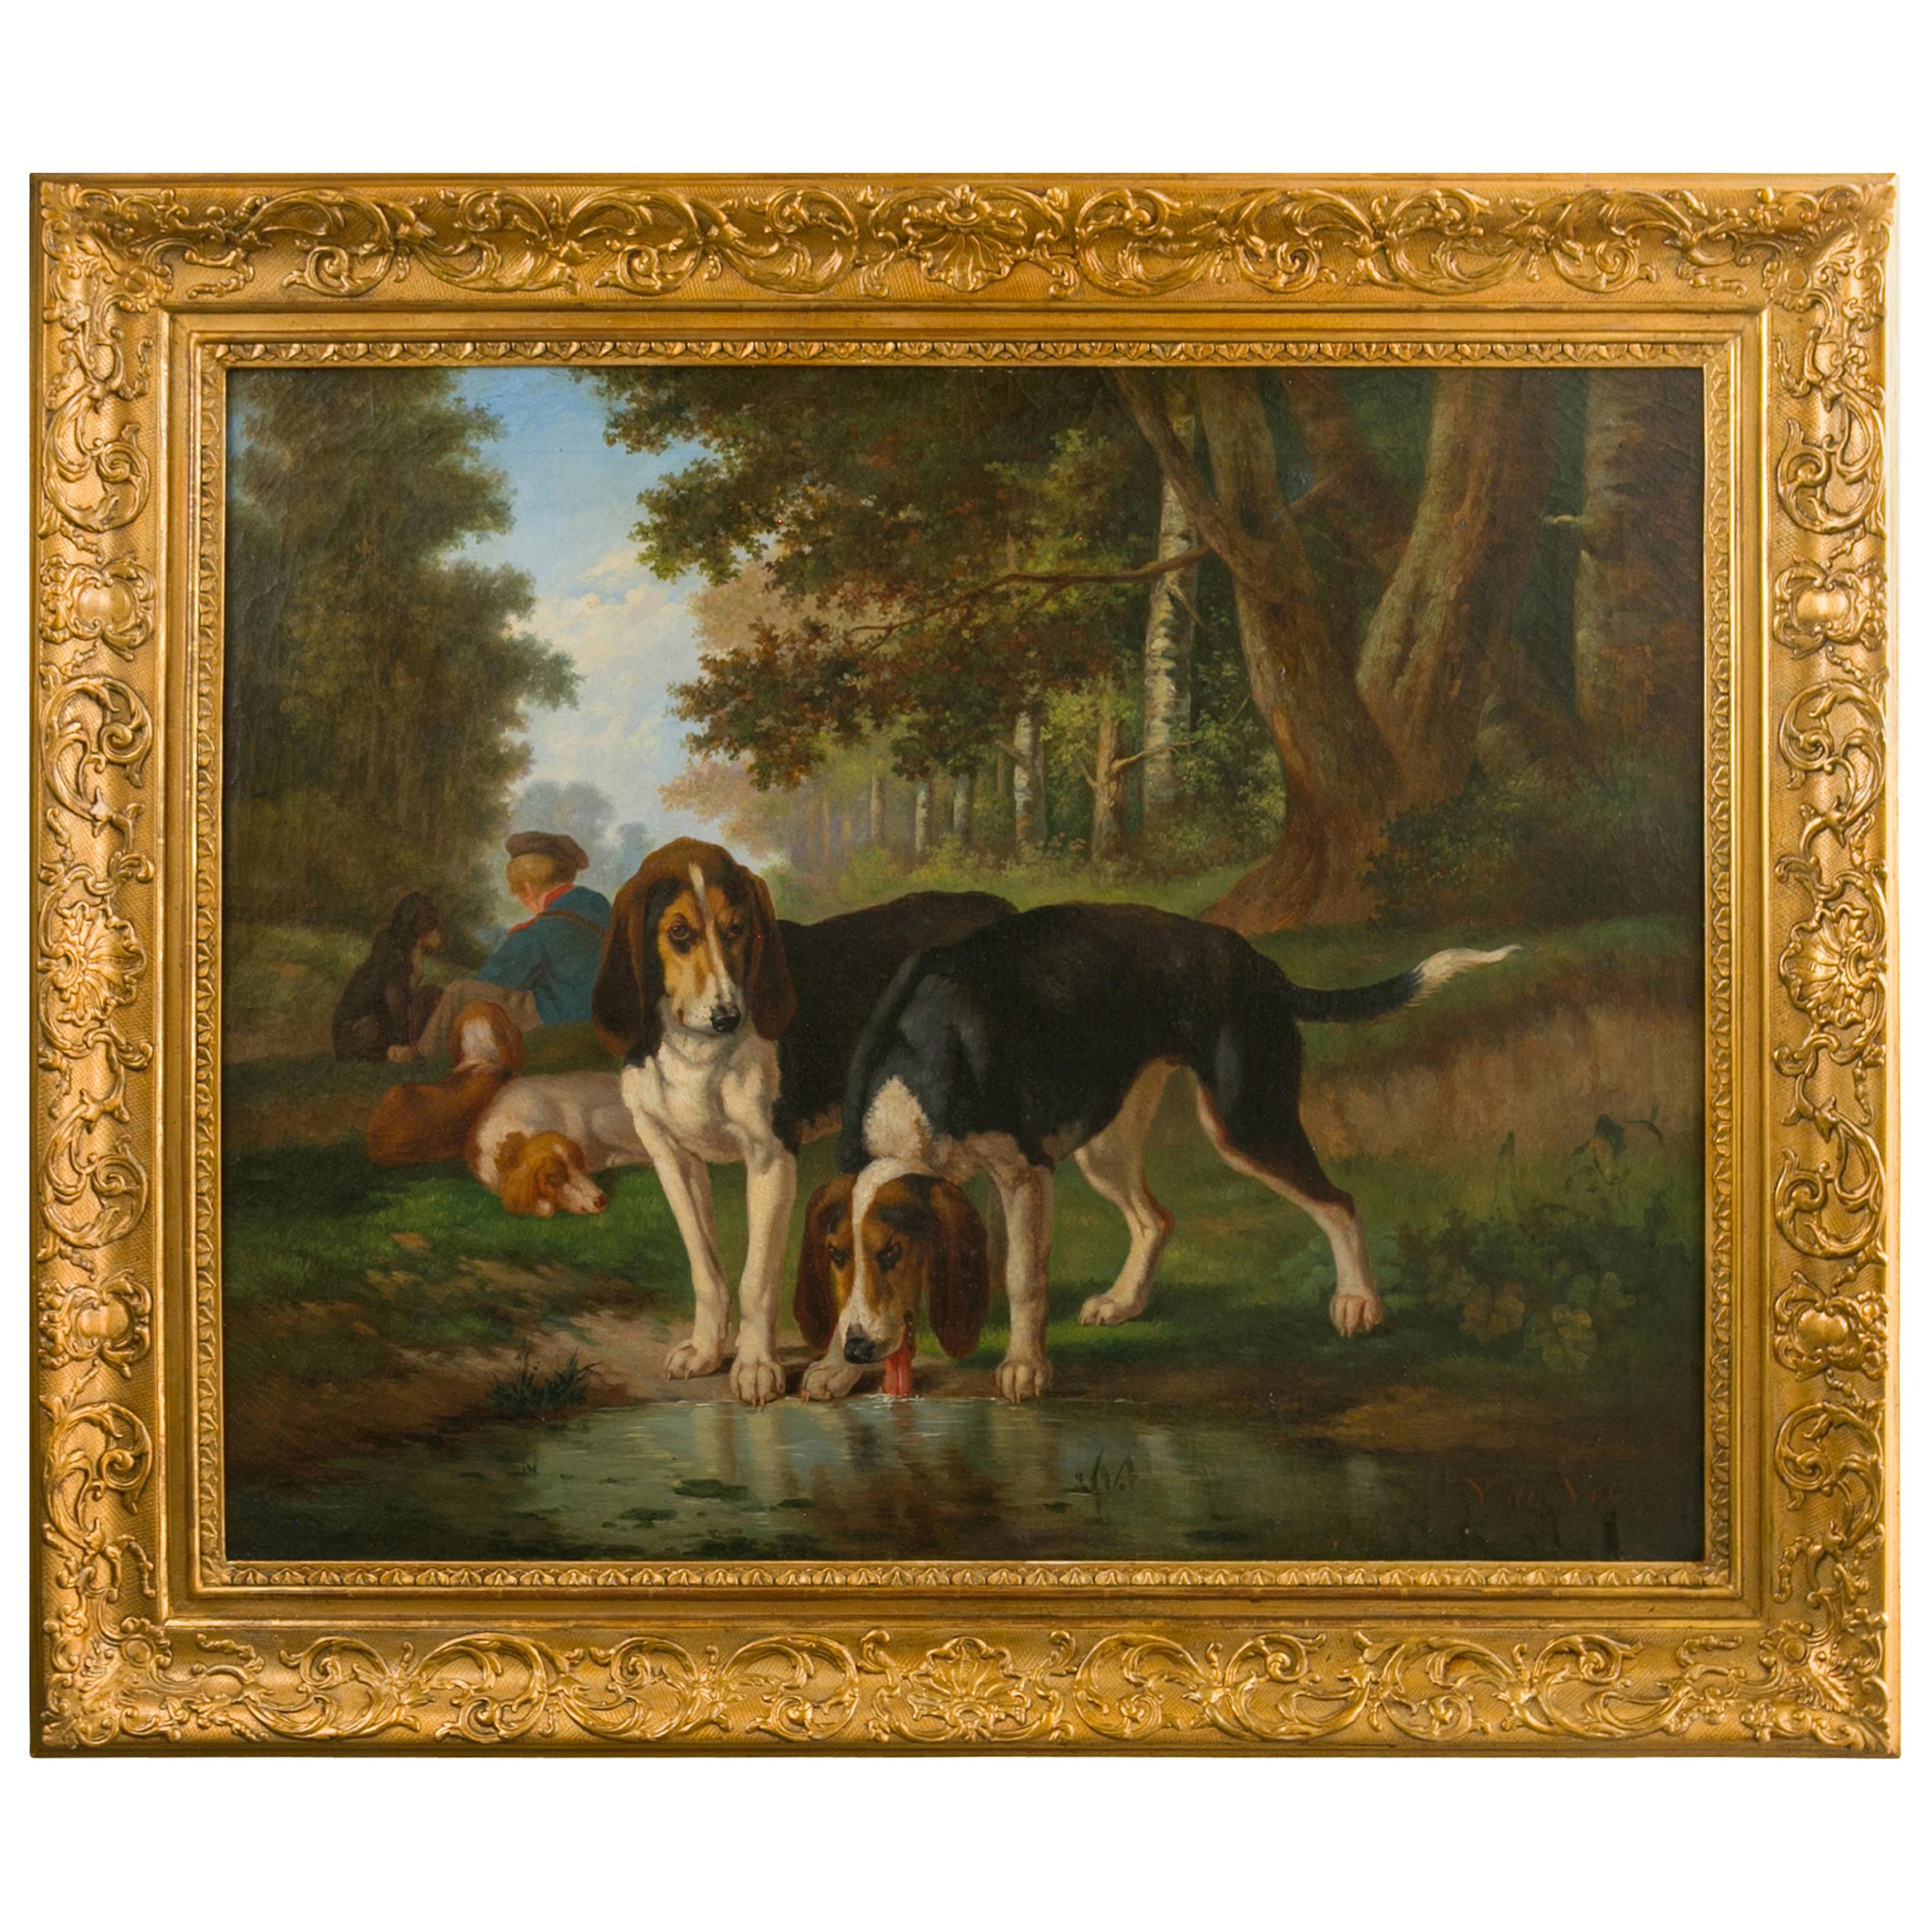 Signed Joost-Vincent De Vos 19th Century Oil Painting Depicting Hounds and Boy